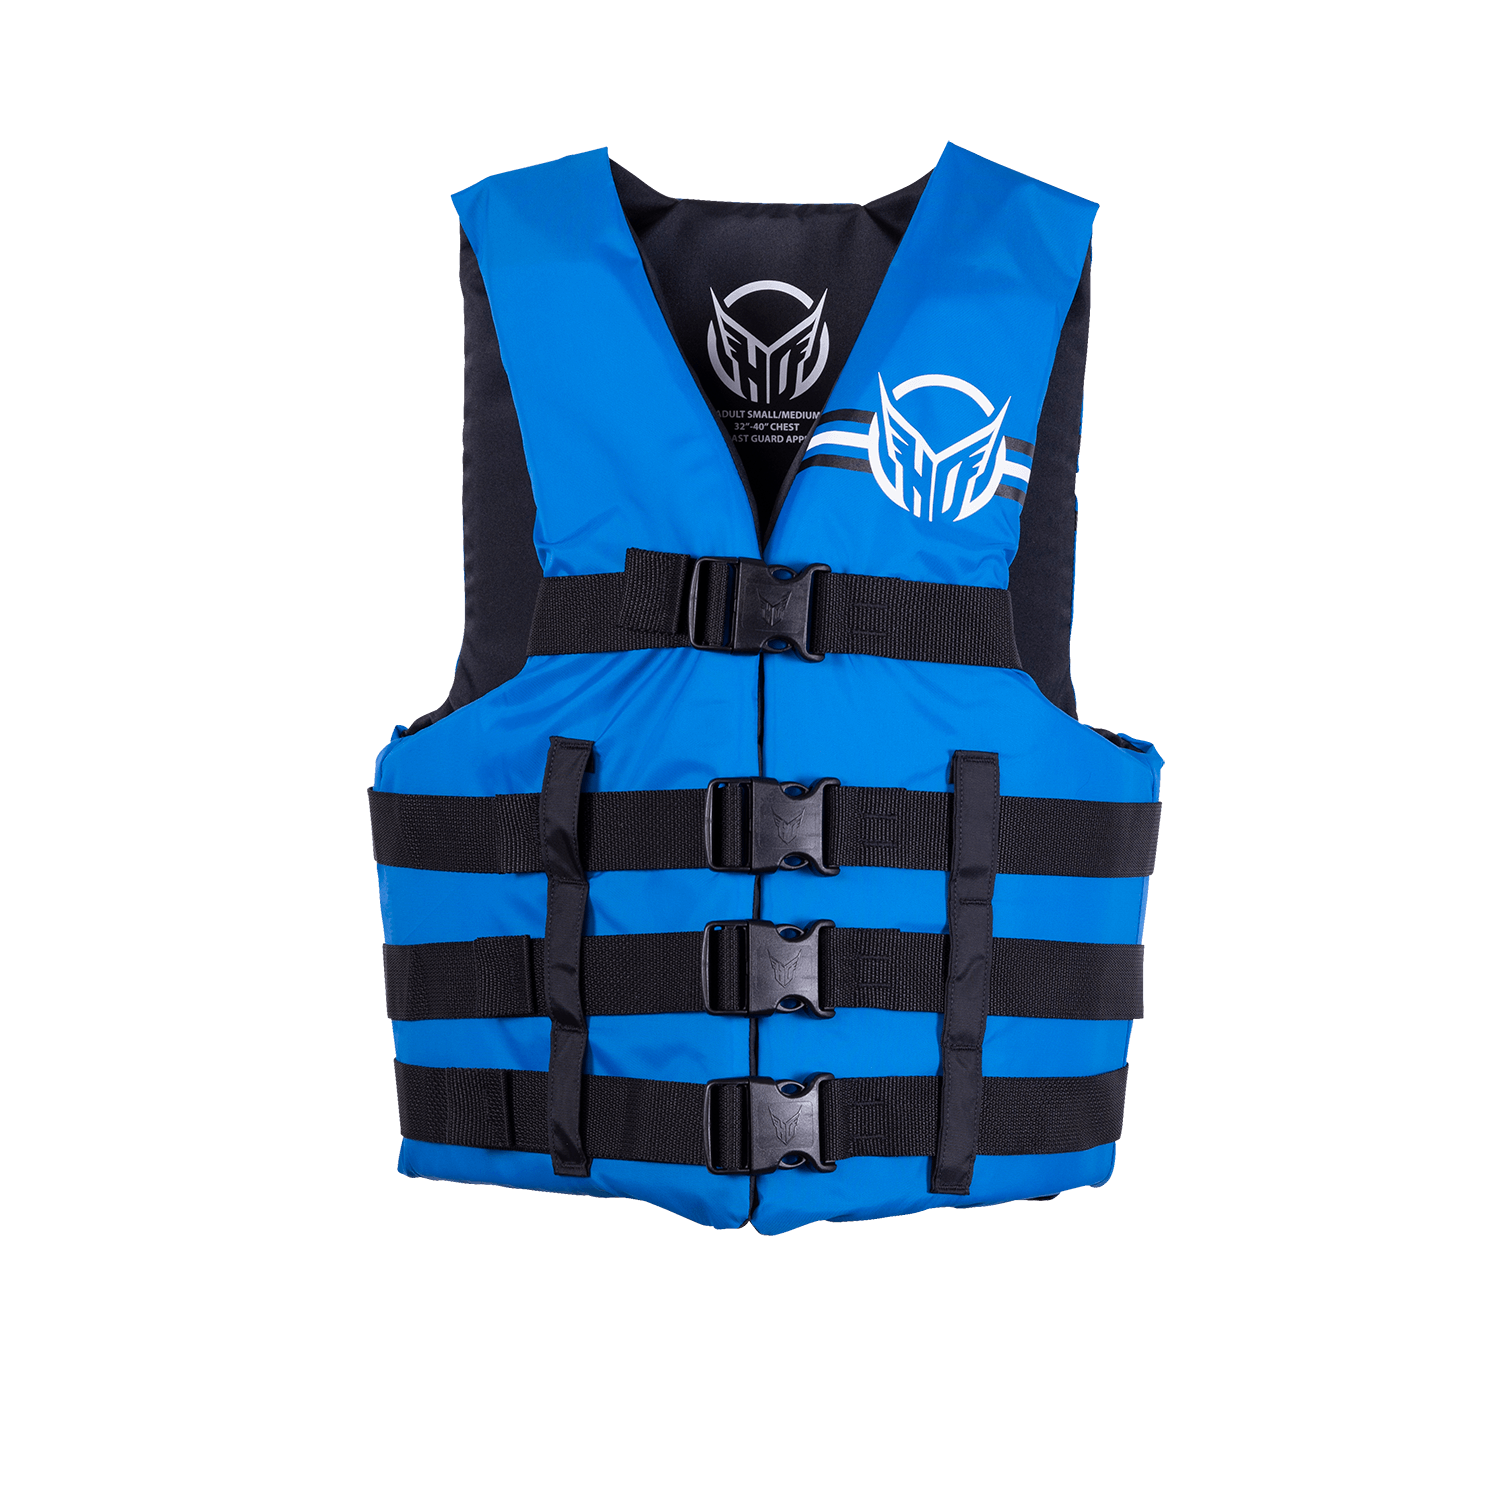 Men's Vests - Insulated Vests for Skiing & Sailing